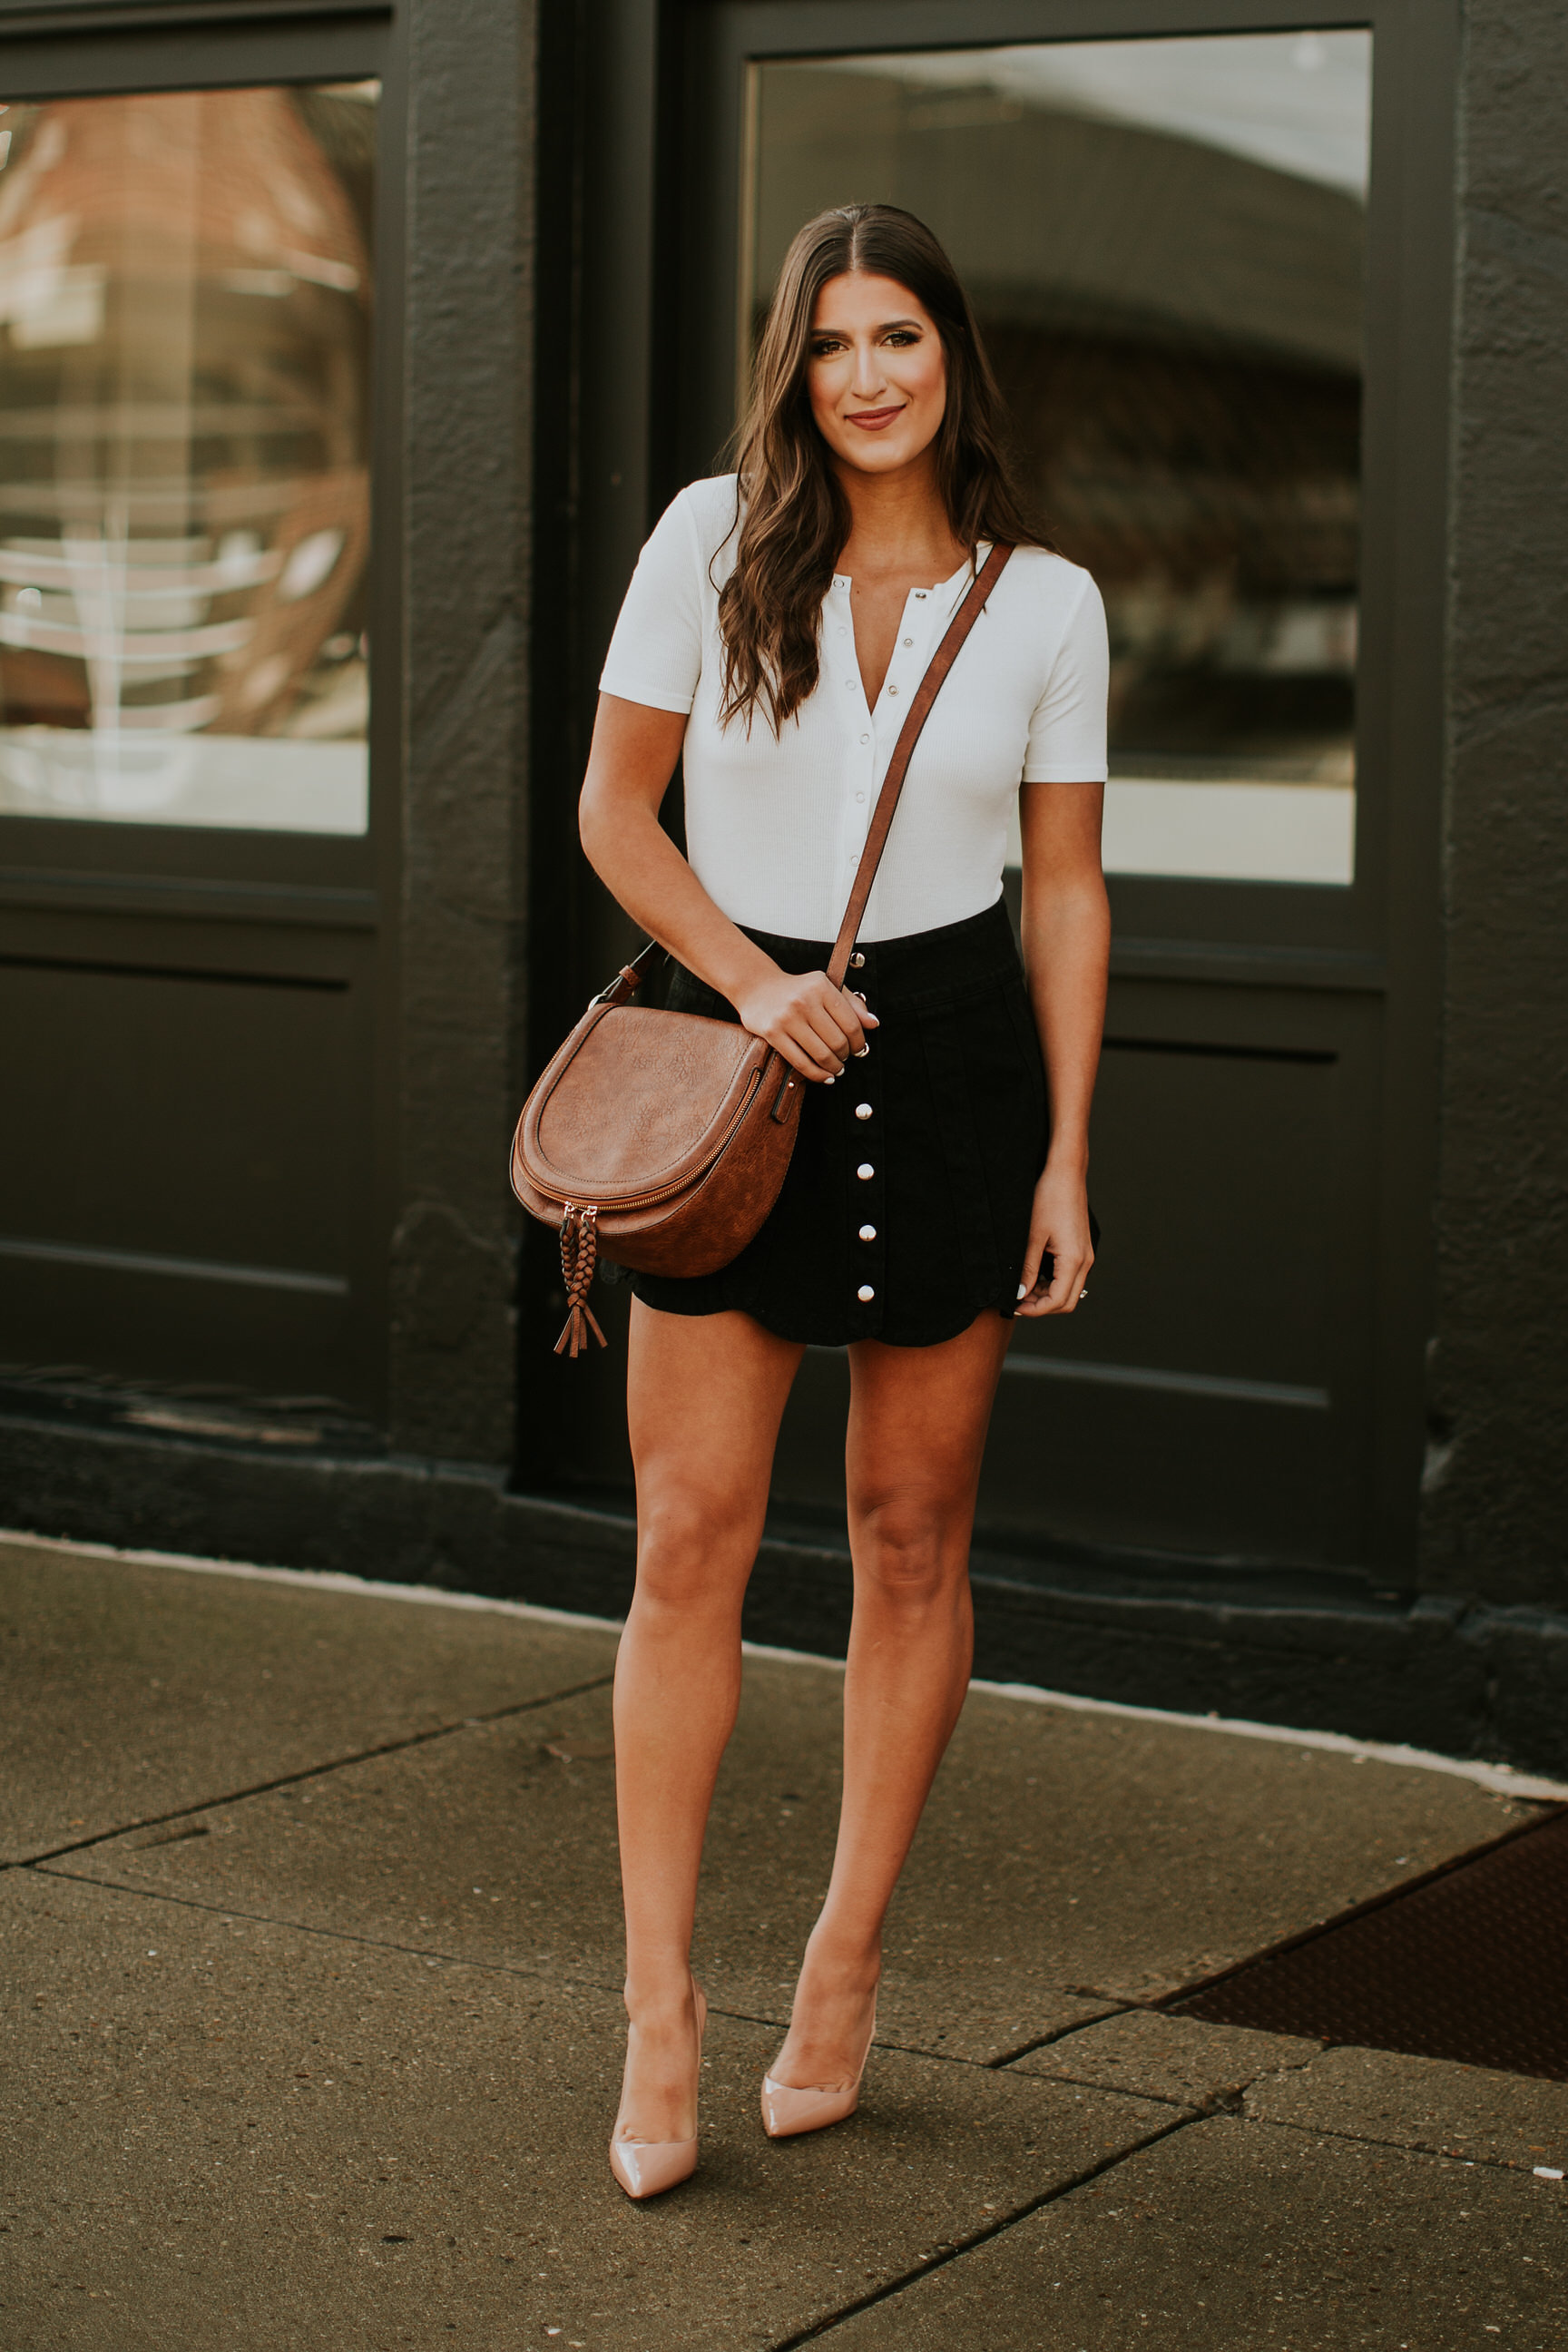 scallop denim skirt, understated leather skirt, denim skirt, jean skirt, tee bodysuit, privacy please, christian louboutin so kate pumps, sole society saddle bag, sole society purse, sole society bags, casual style, feminine style // grace wainwright a southern drawl